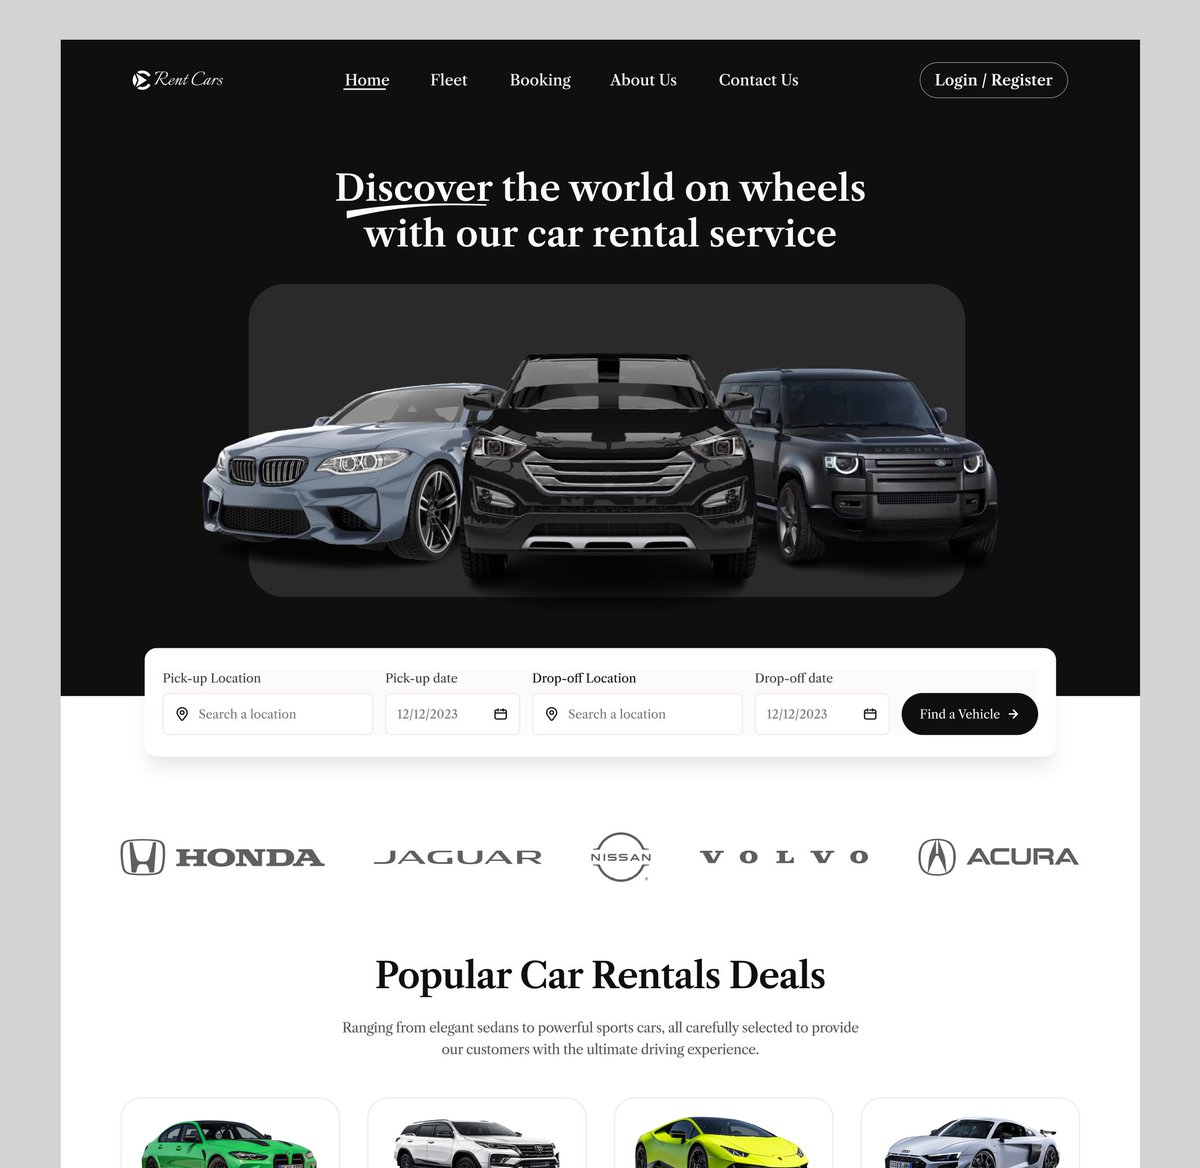 Landing page concept for a Car Rental Website ⏬ ⏬

Wishing everyone a  productive week ahead! 💜💛💚

#webdesign #uiux #uidesign #uiuxdesigner  #uiuxdesign